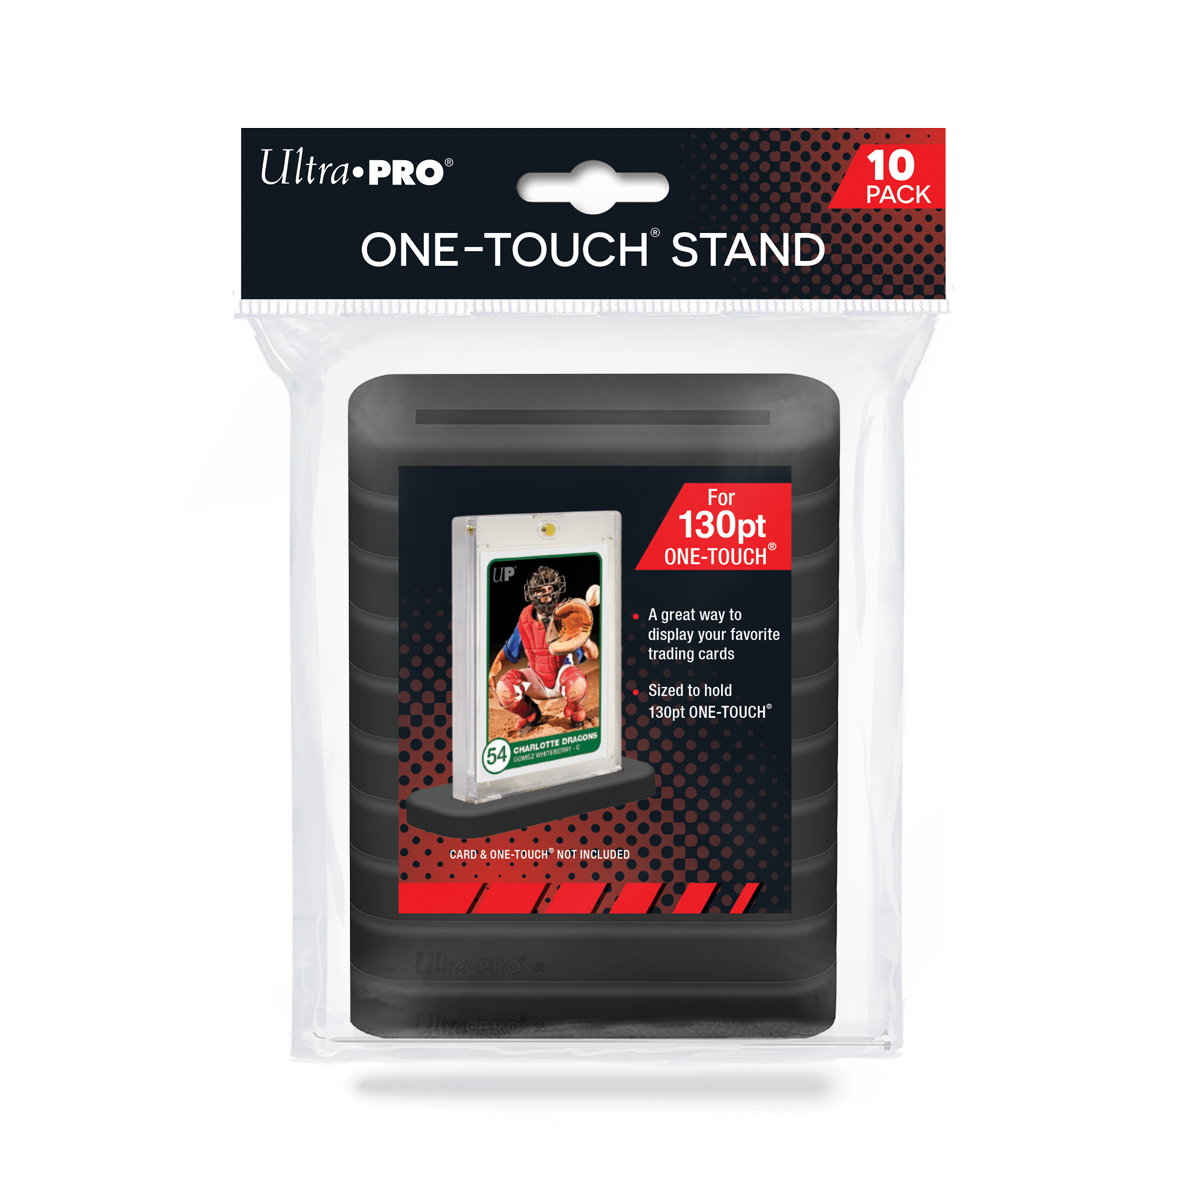 Ultra PRO: One-Touch Stand - 130pt (10-pack) | Red Riot Games CA